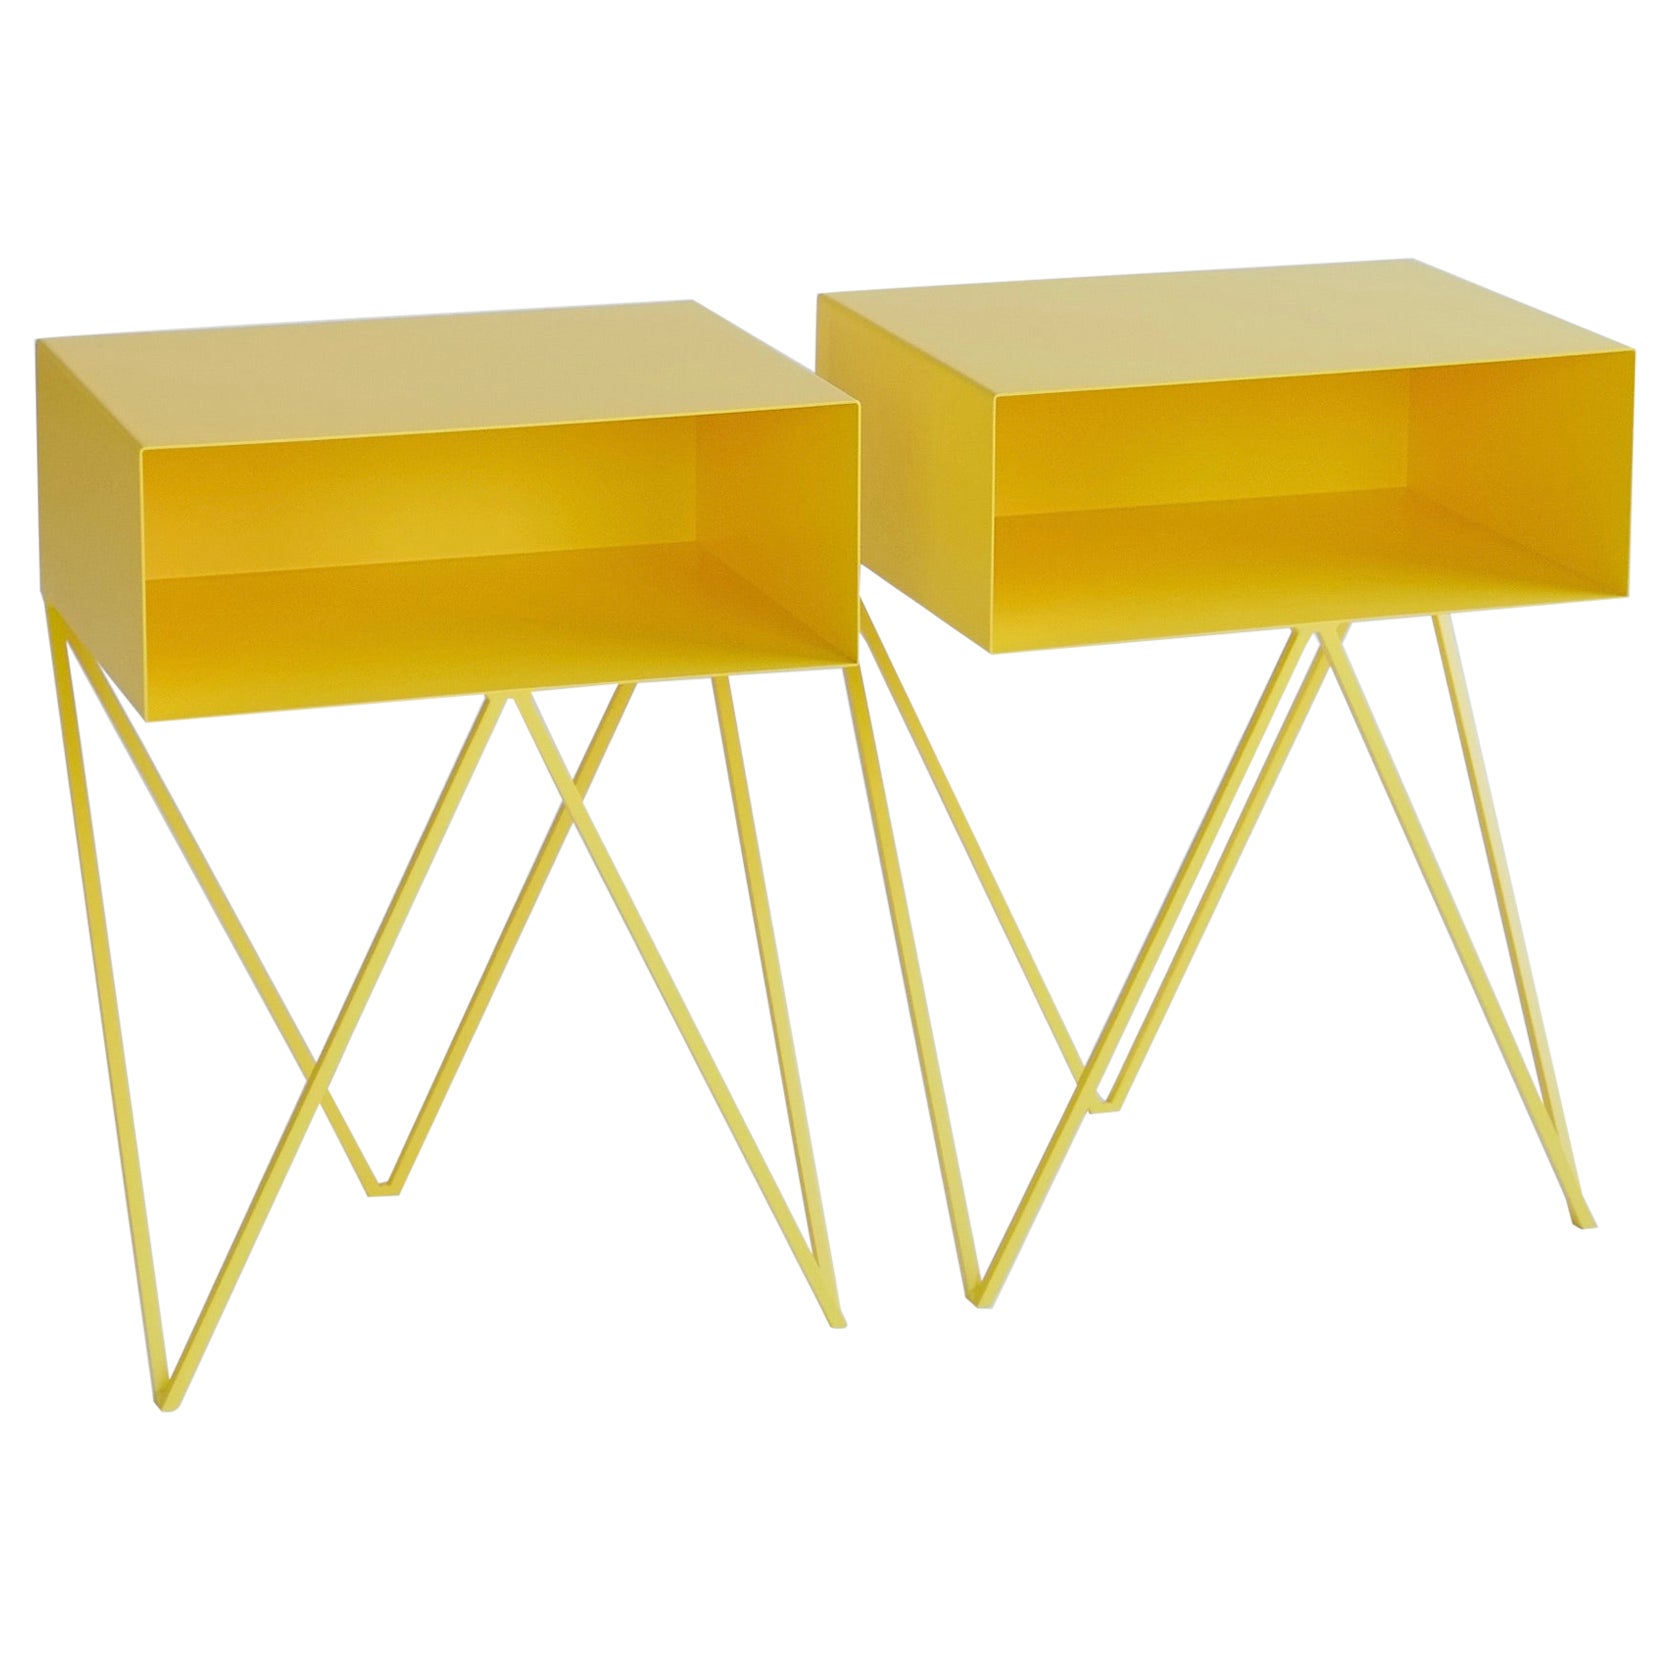 Pair of Yellow Robot Bedside Tables - Nightstands